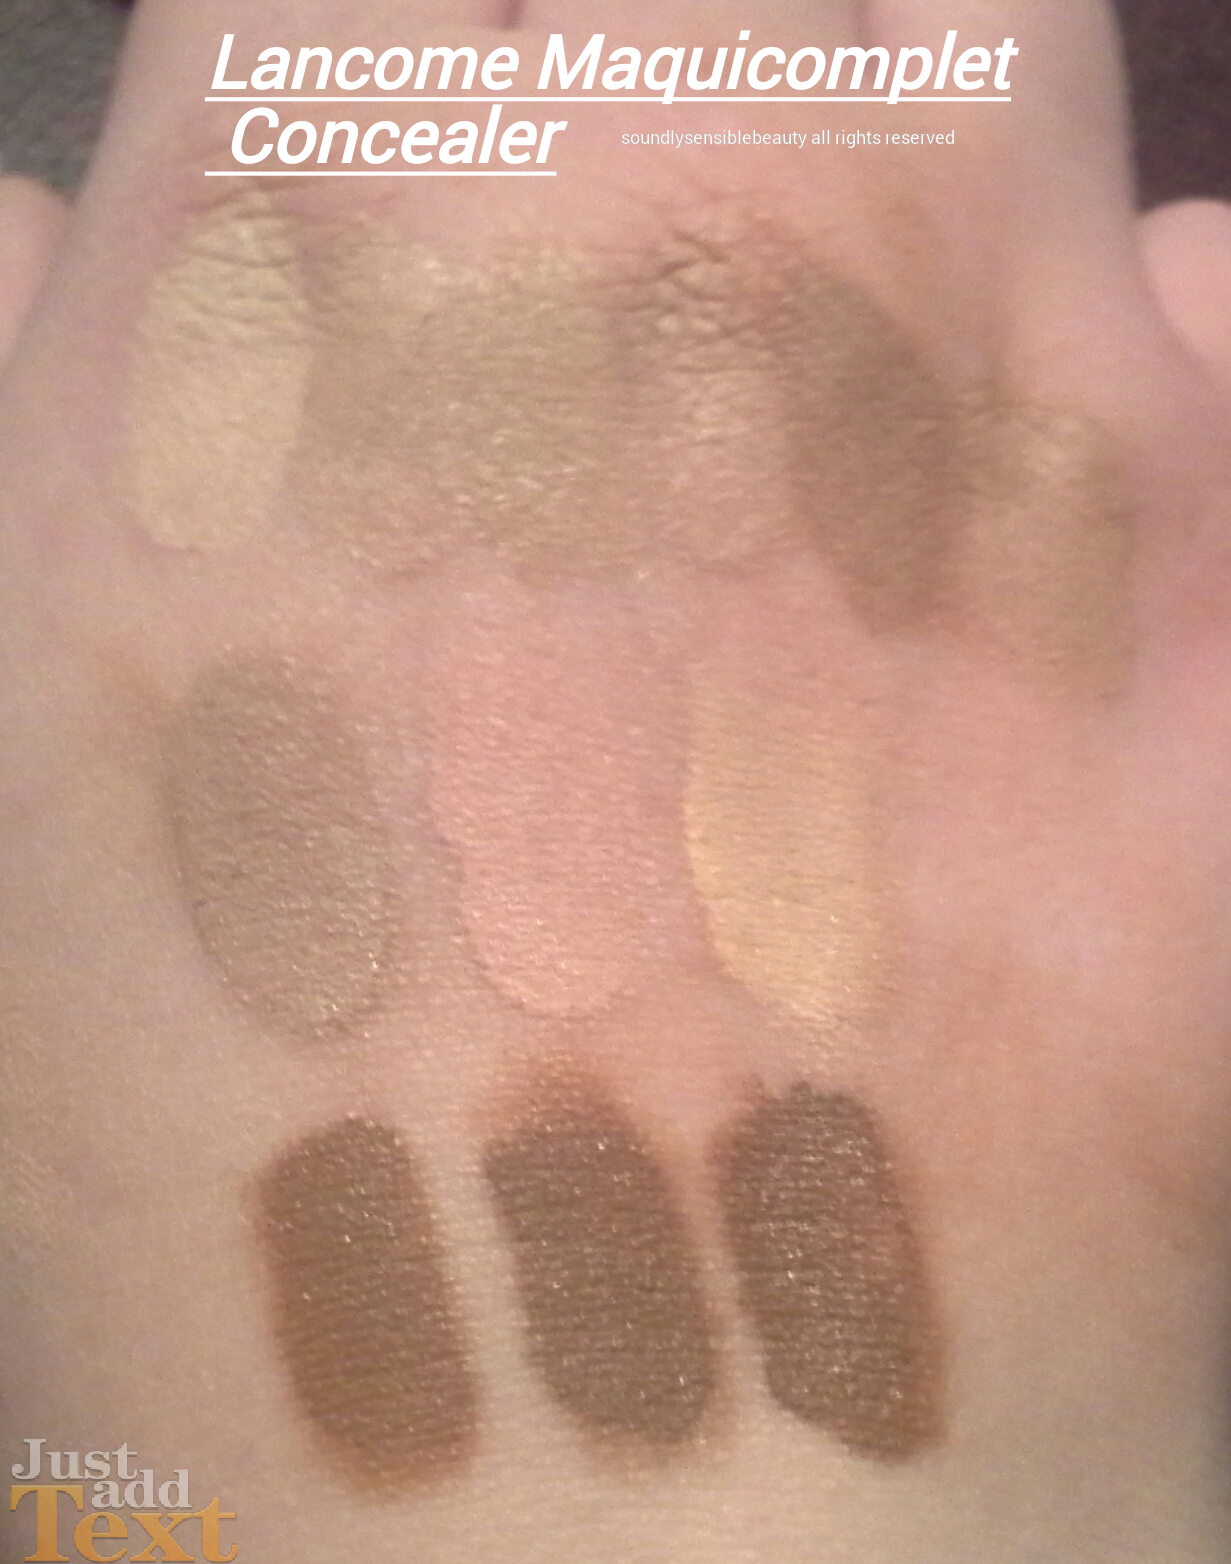 Lancome Maquicomplet; Full Coverage Concealer; Review & Swatches of Shades